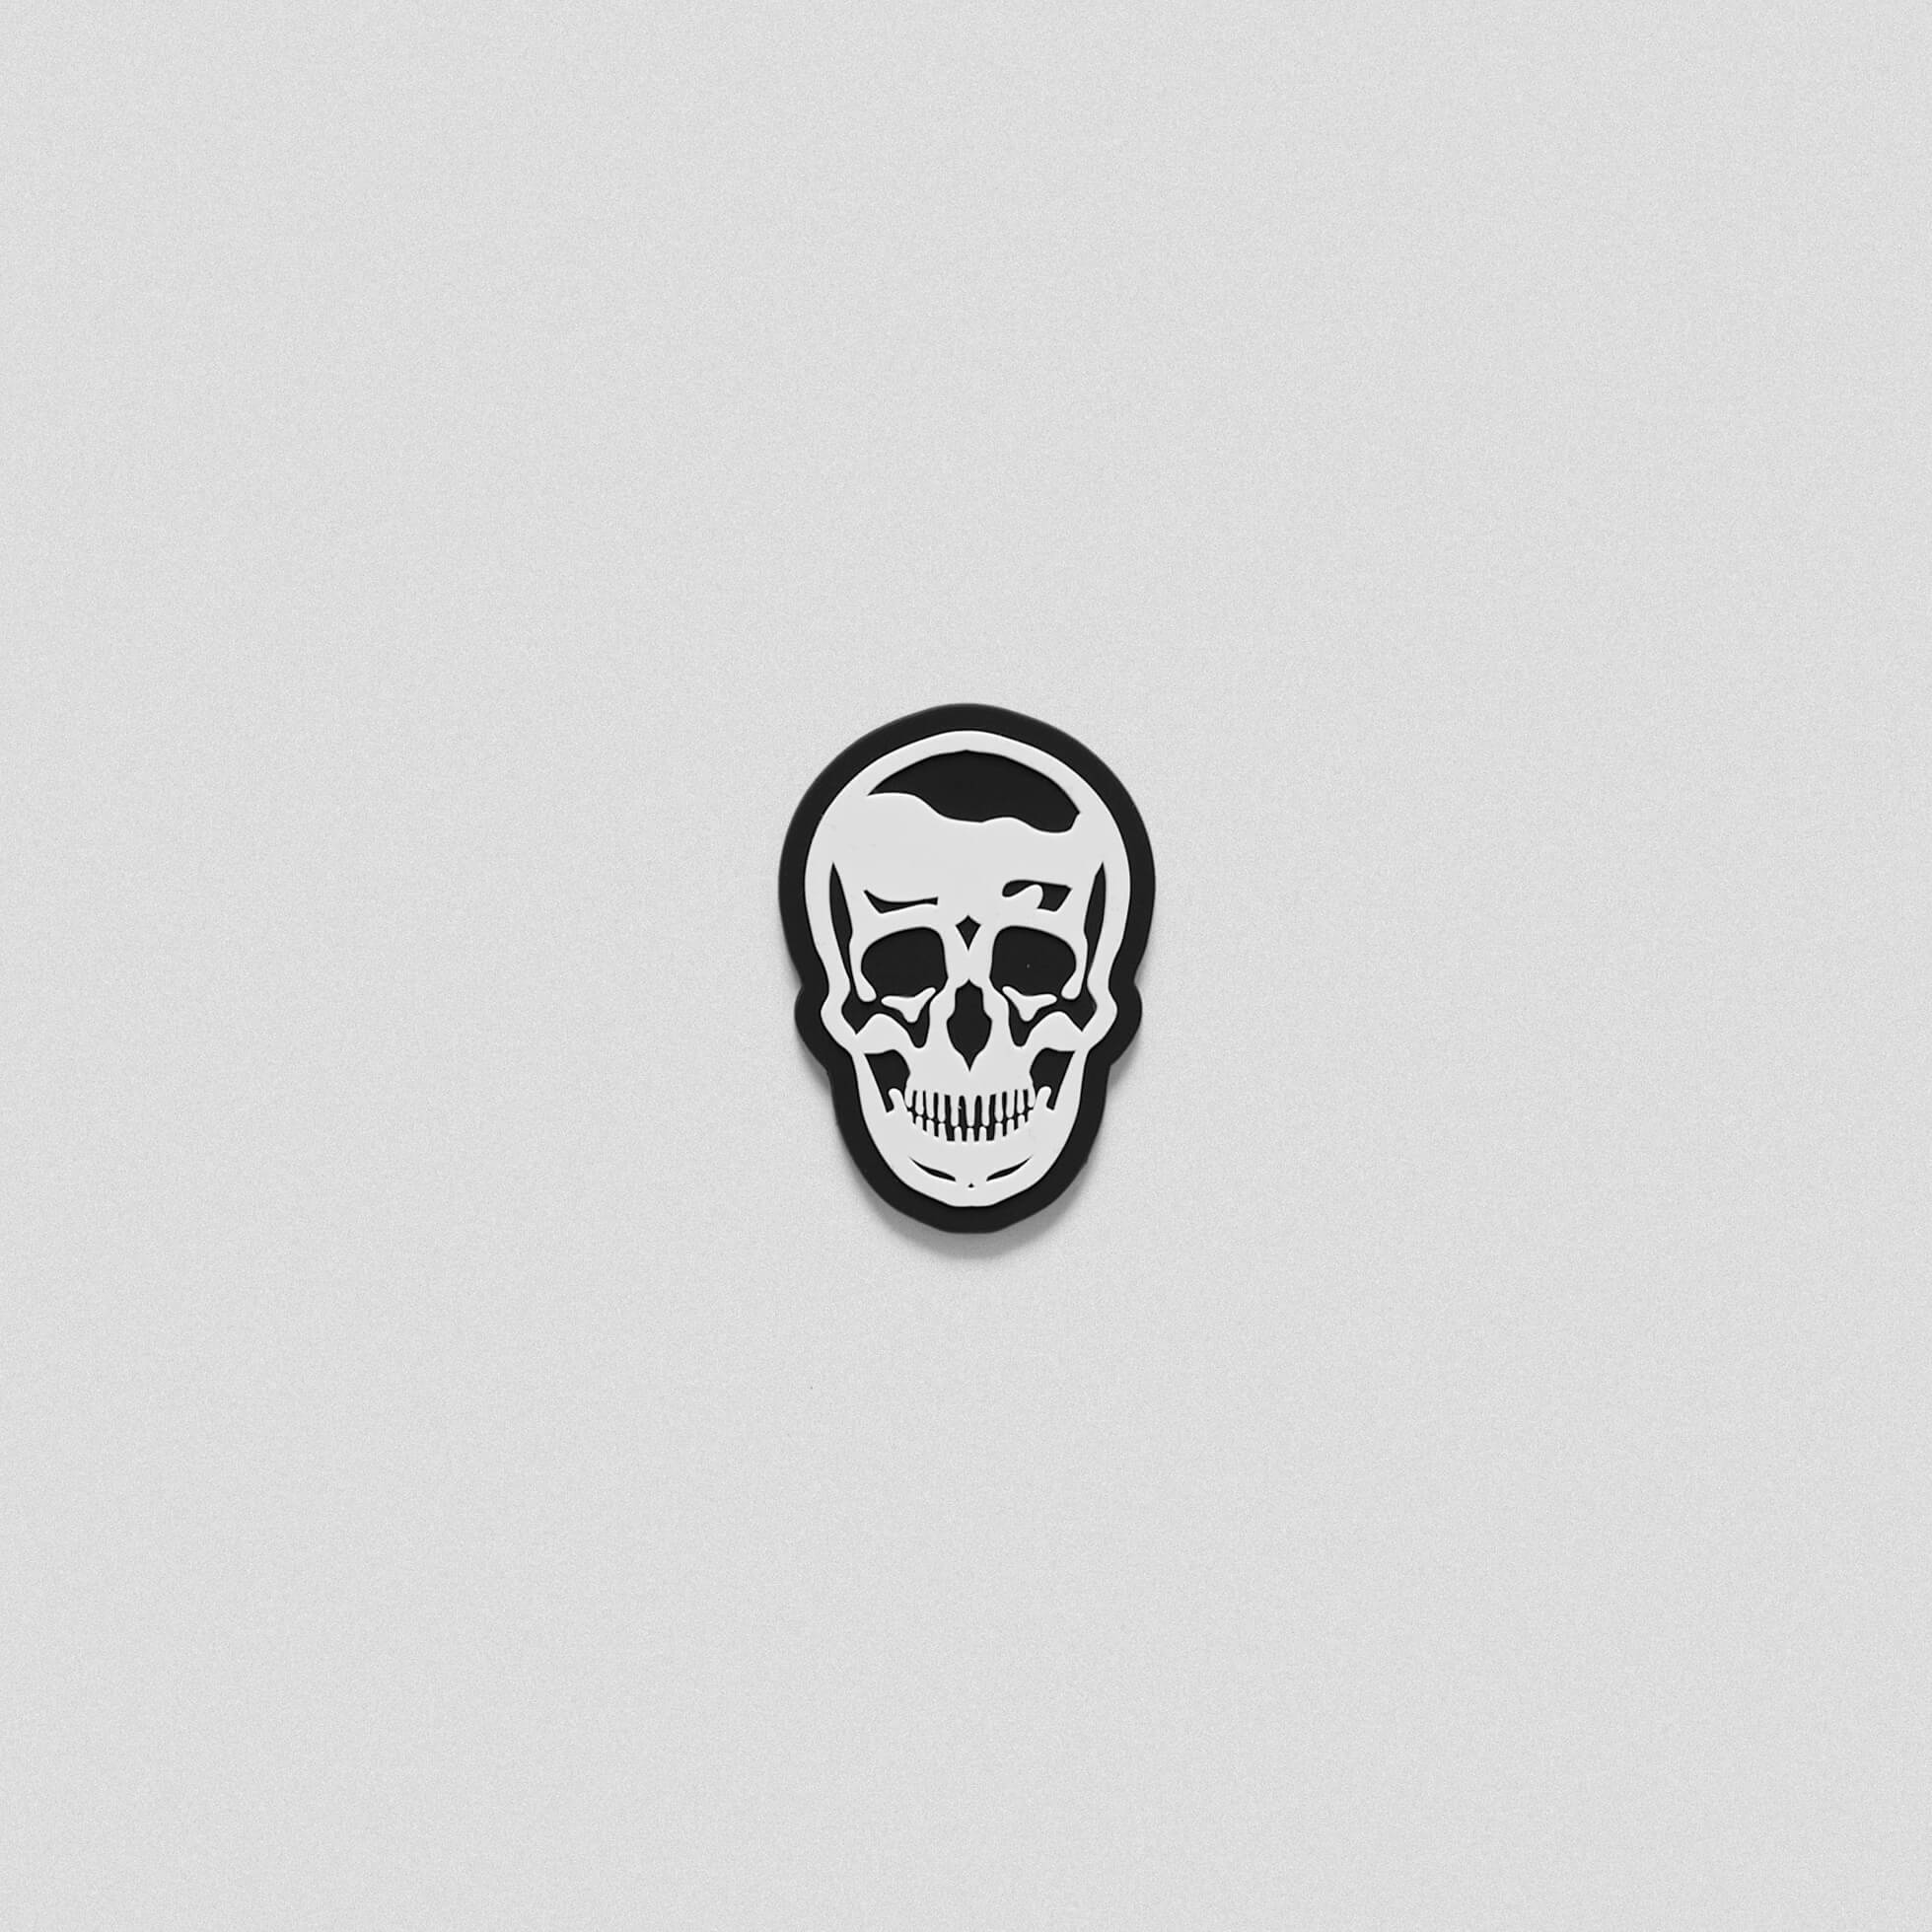 A black white patch in the shape of the Gymreapers skull logo.